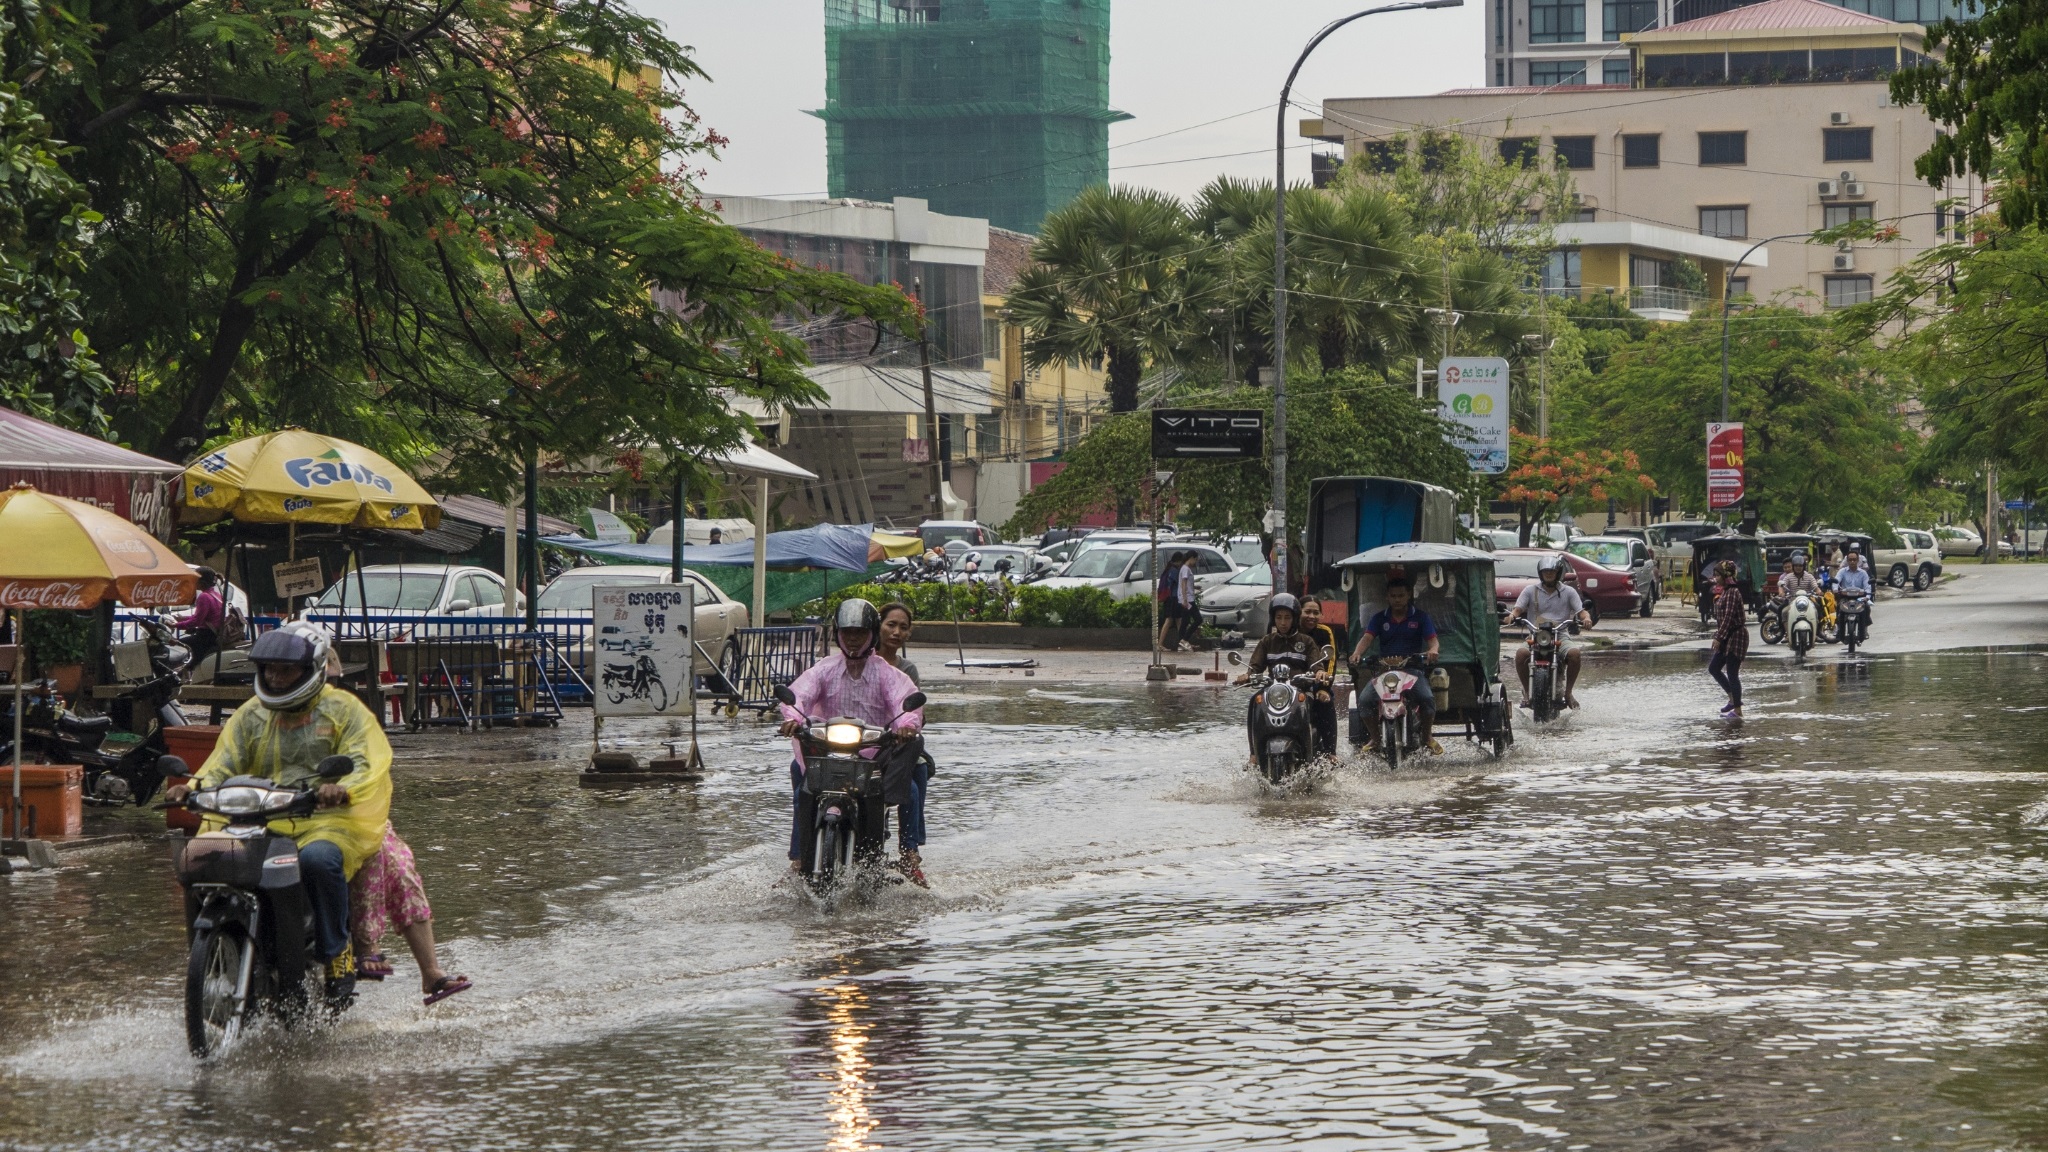 Storms And Floods Could Set In Between October To November In Central Vietnam